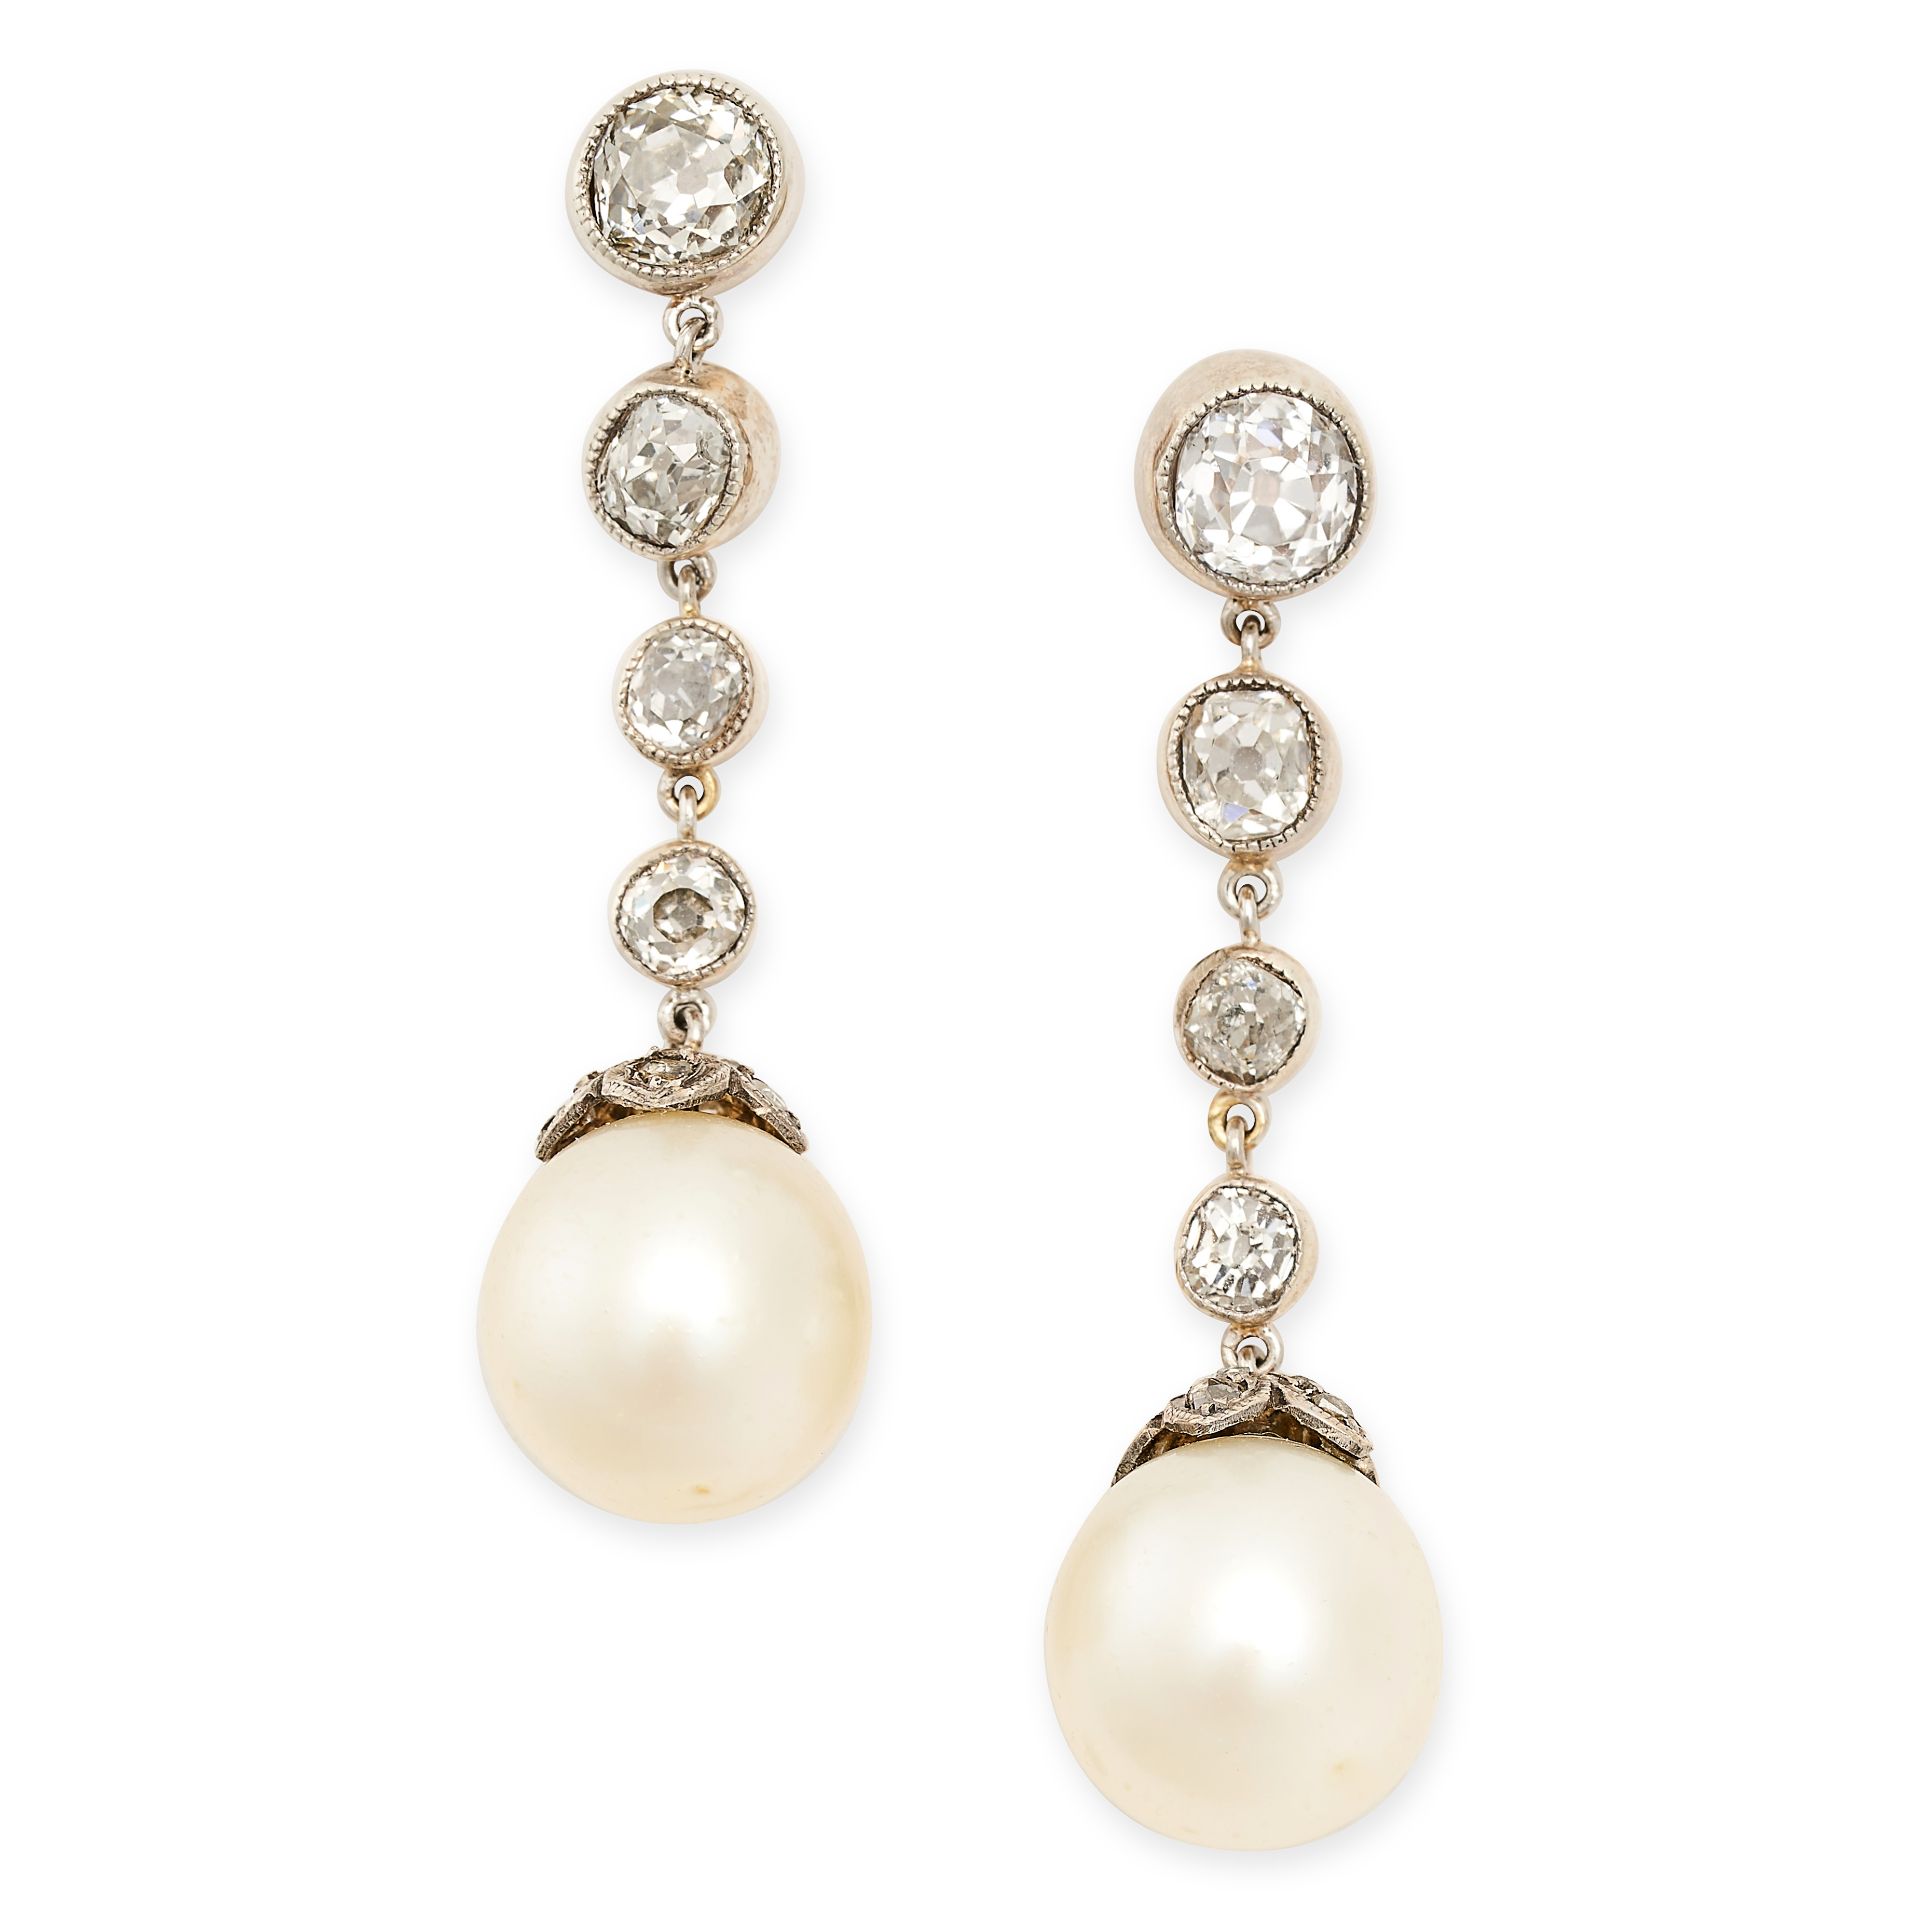 A PAIR OF ANTIQUE NATURAL PEARL AND DIAMOND DROP EARRINGS each set with a row of old cut diamonds